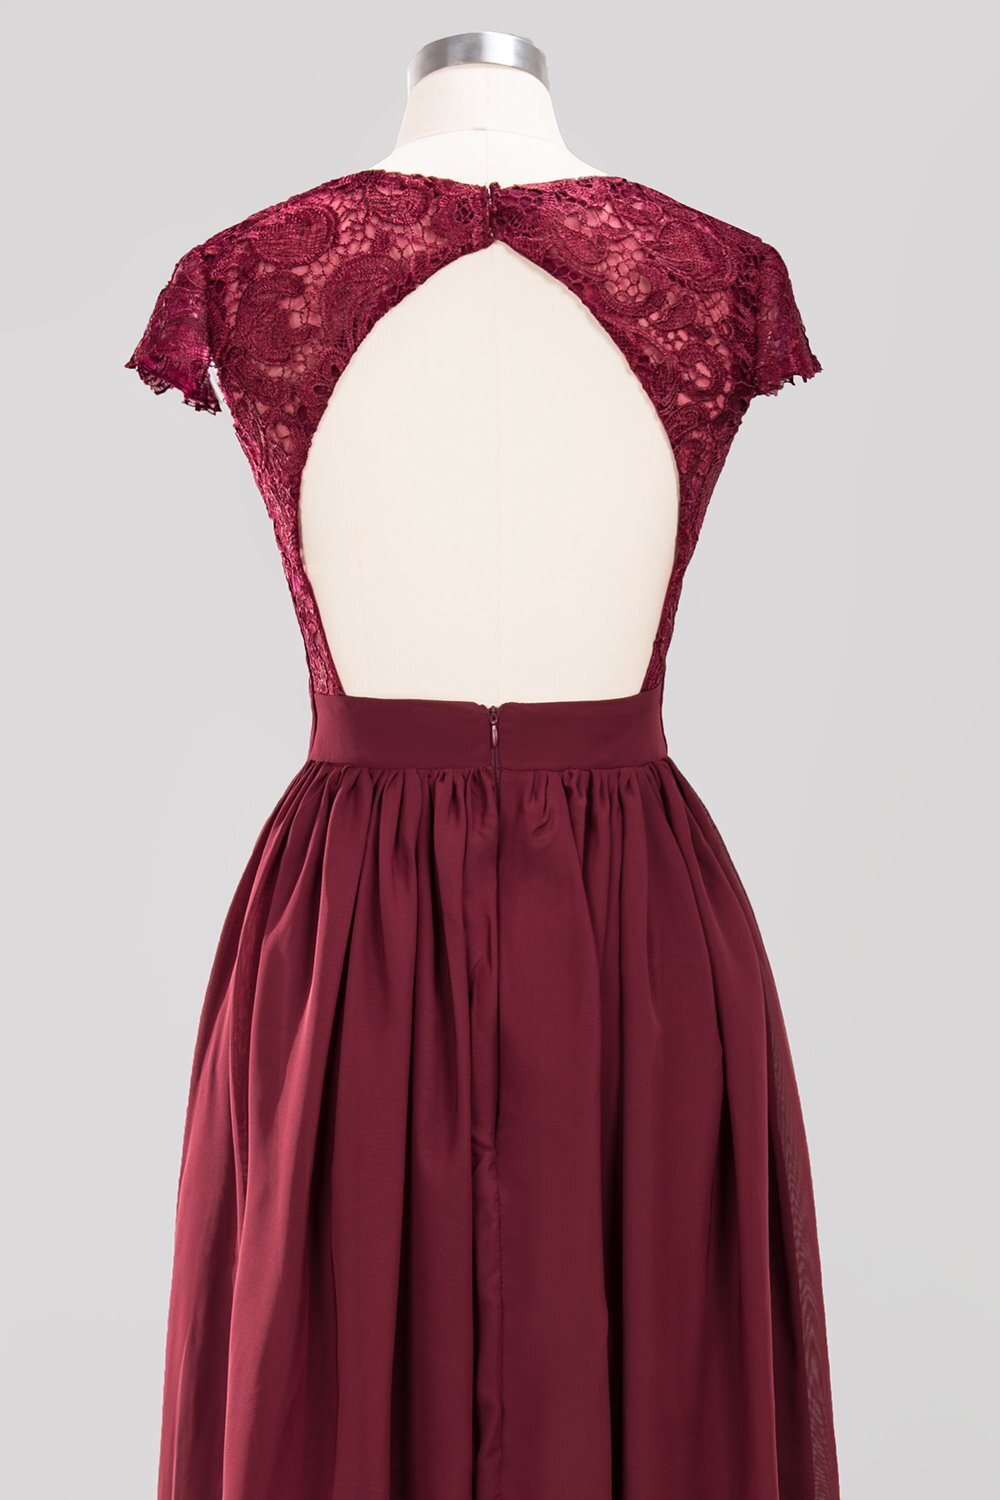 Cap Sleeves Wine Red Lace and Chiffon A-line Long Bridesmaid Dress